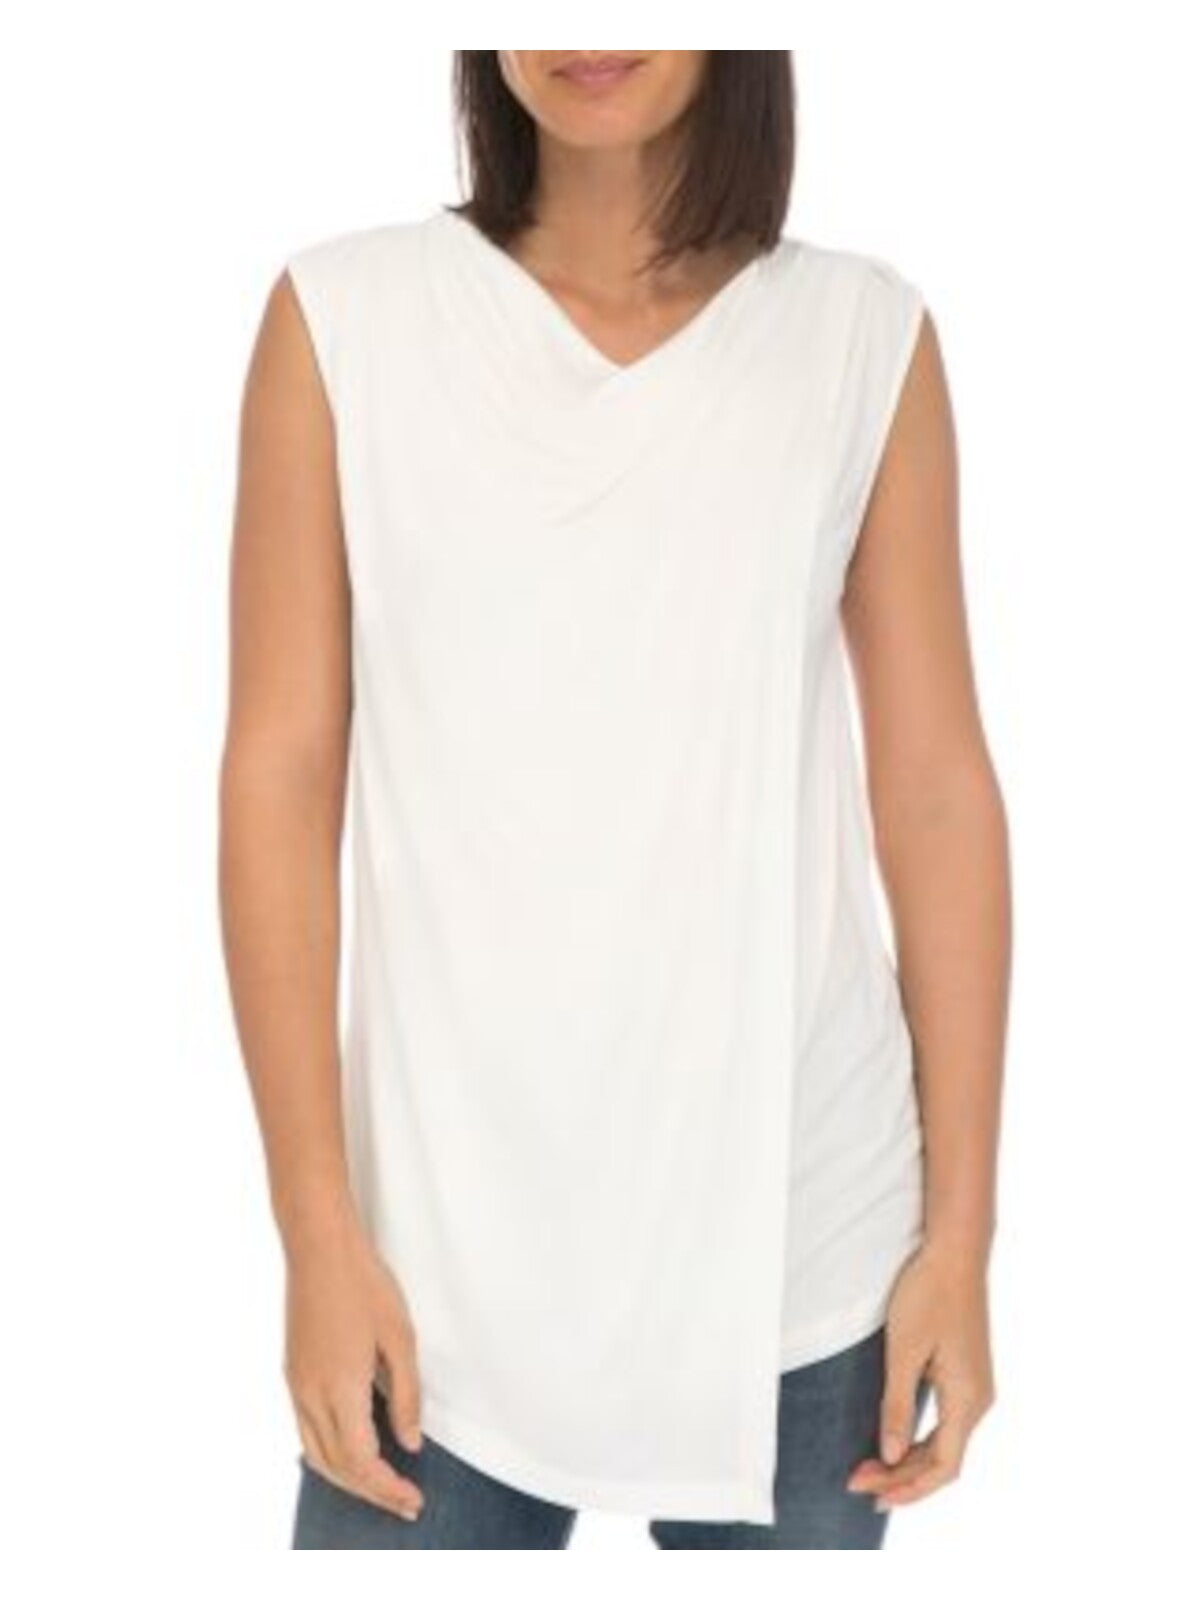 B COLLECTION Womens White Stretch Sleeveless Cowl Neck Tank Top M